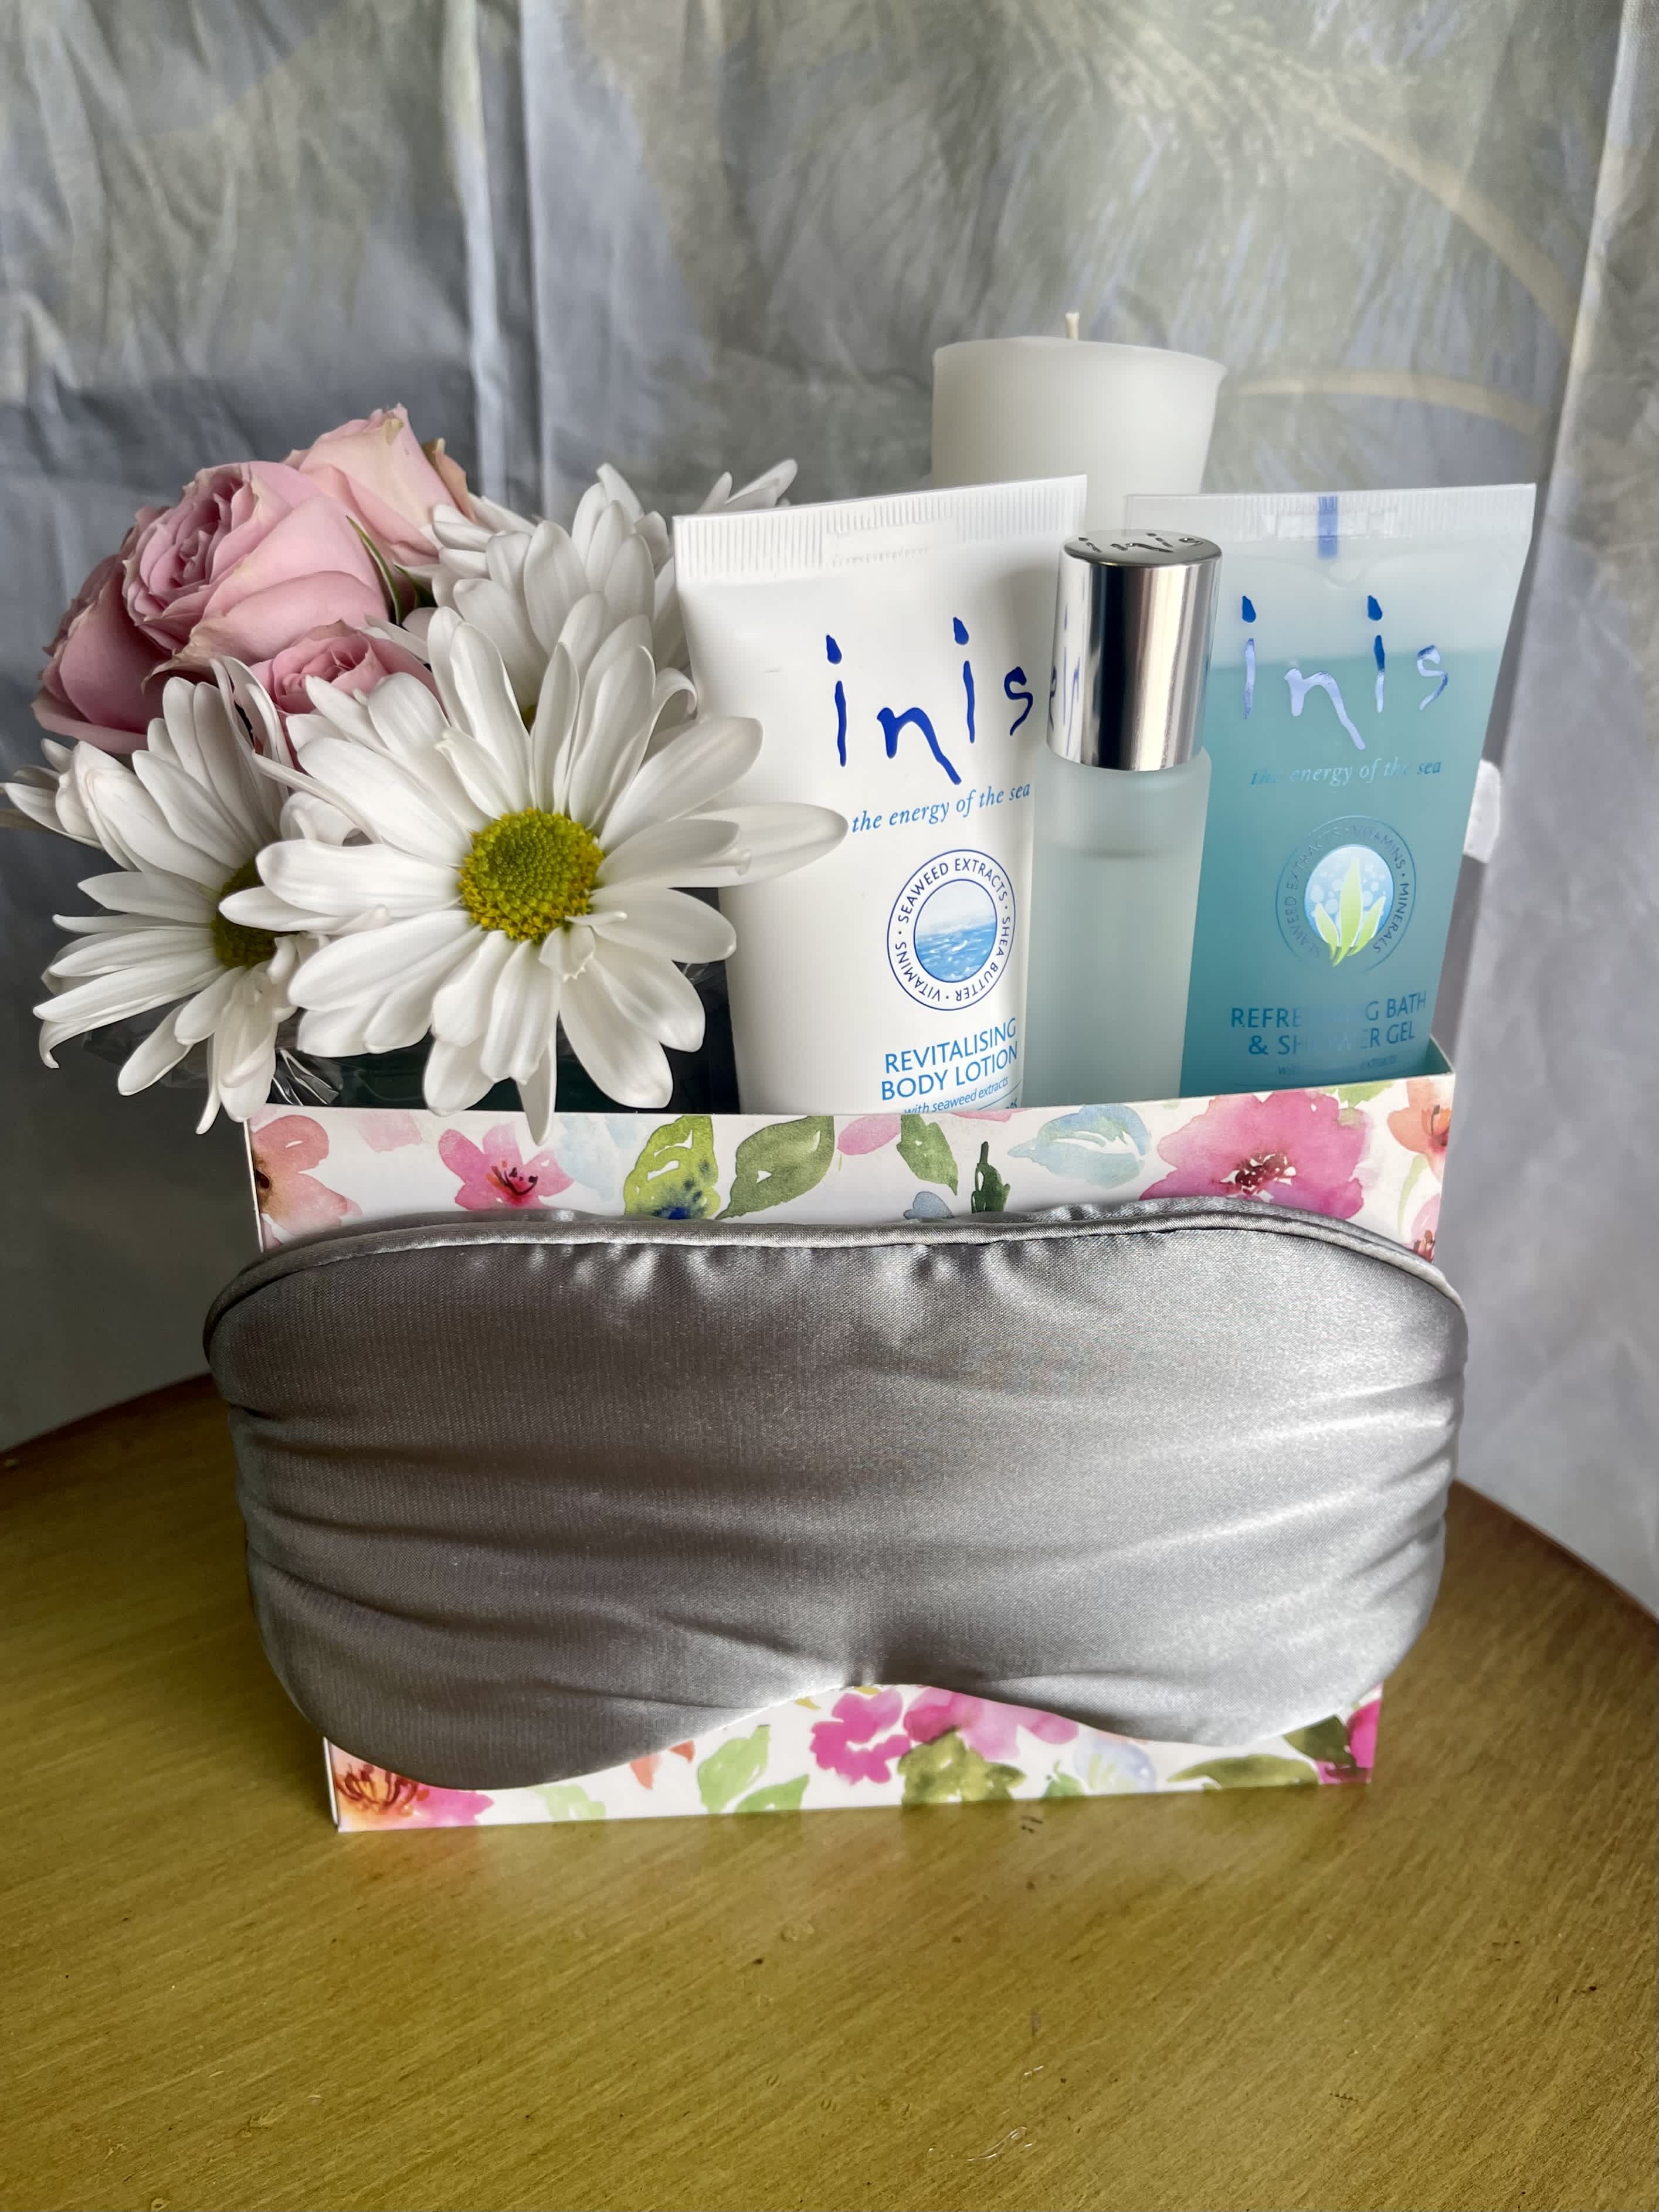 Peace and Pampering - A blooming box of relaxation for her! Gift set includes a small arrangement of fresh flowers, shower gel, lotion, and cologne by Inis, a votive candle by Tyler, a bath sponge, and a sleep mask! A thoughtful gift that promotes self care arrives in a floral printed box, wrapped in cellophane, and adorned with a ribbon that makes it a beautifully presented gift.